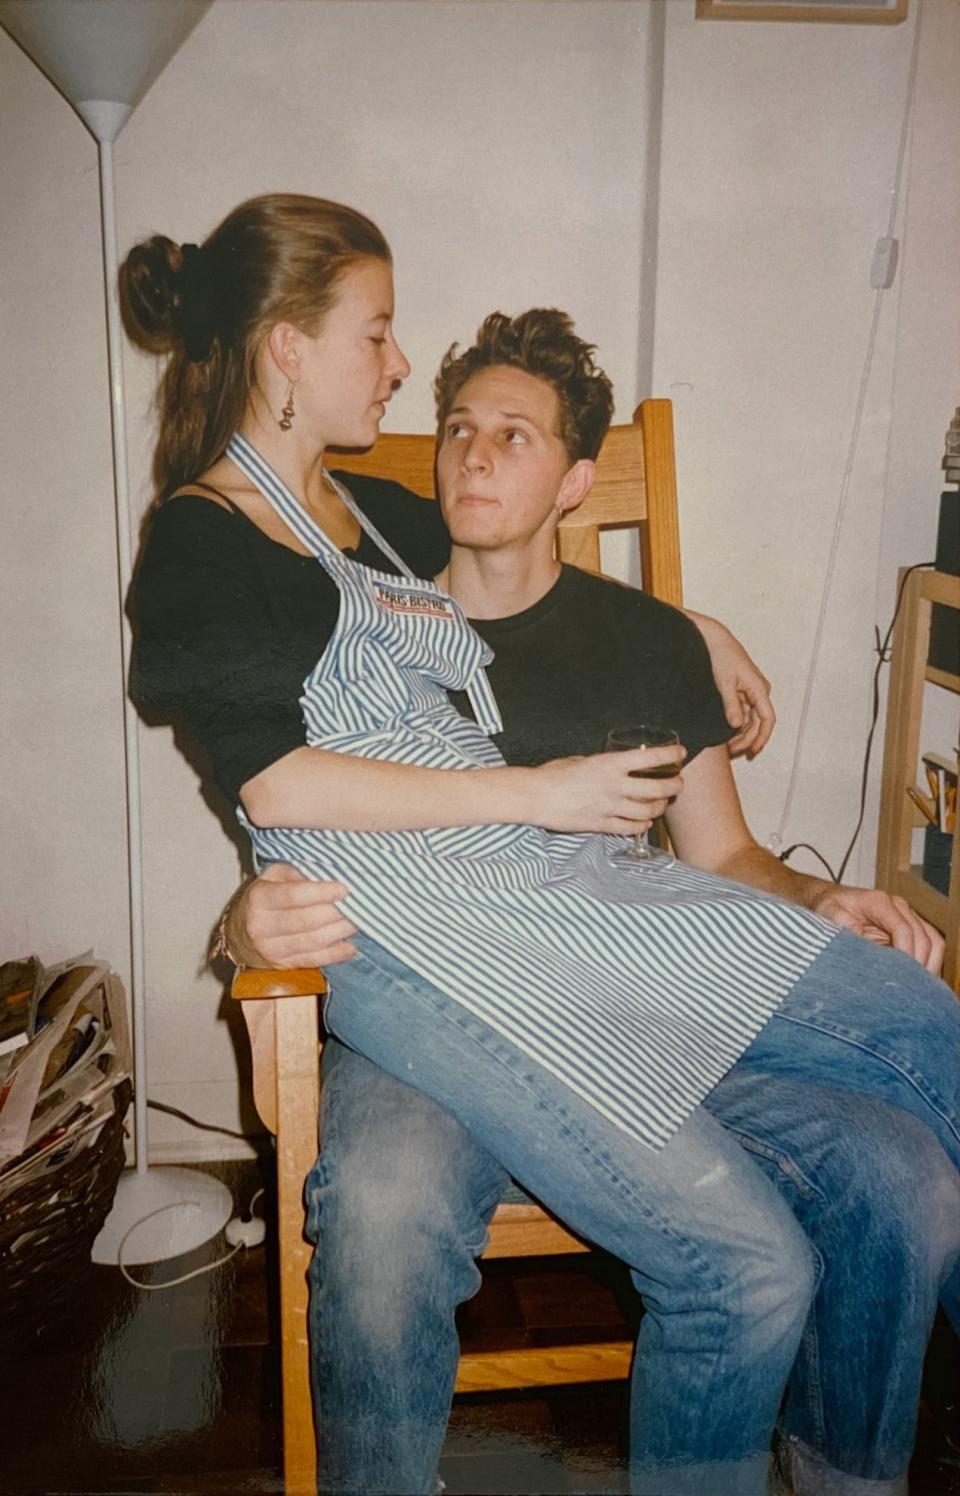 Grant with her now-husband Matt Ross, sometime in the early '90s, perched in her first kitchen at 71st and Broadway.